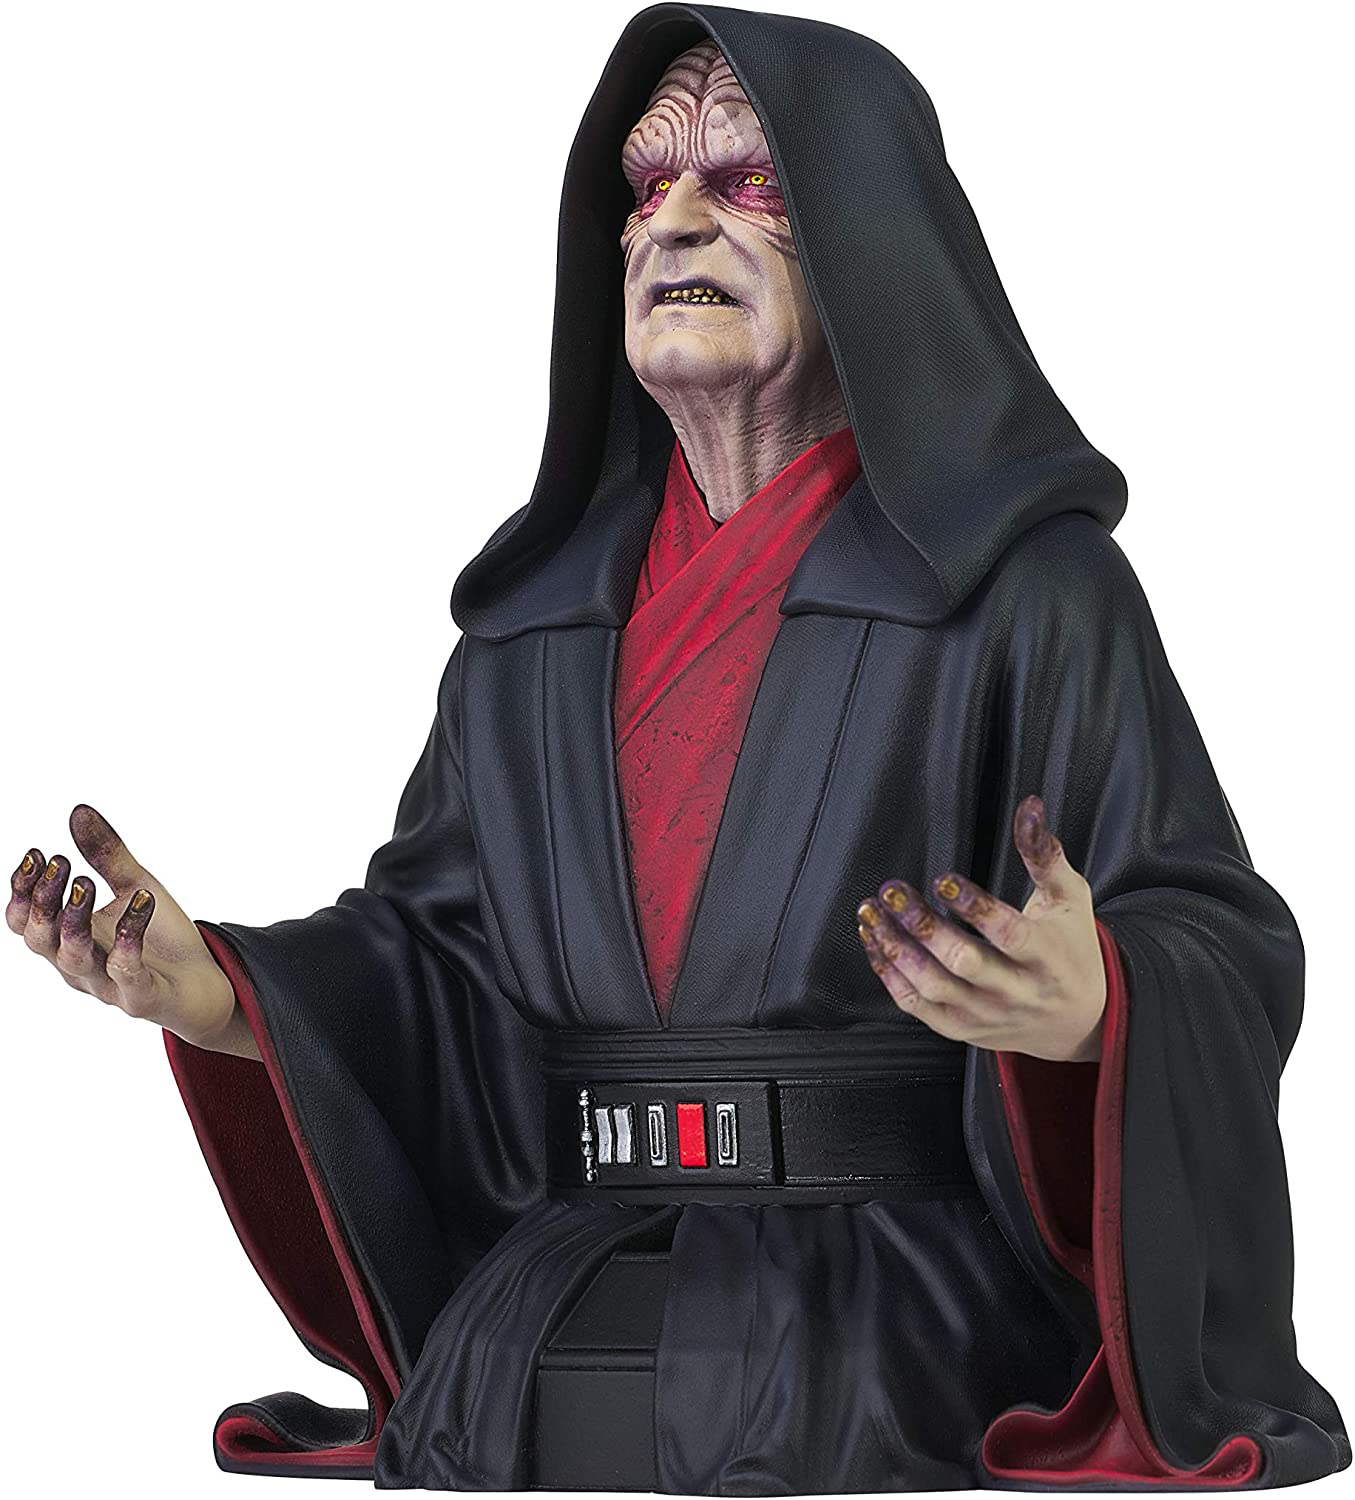 TROS Emperor Palpatine 1/6 scale Bust 2